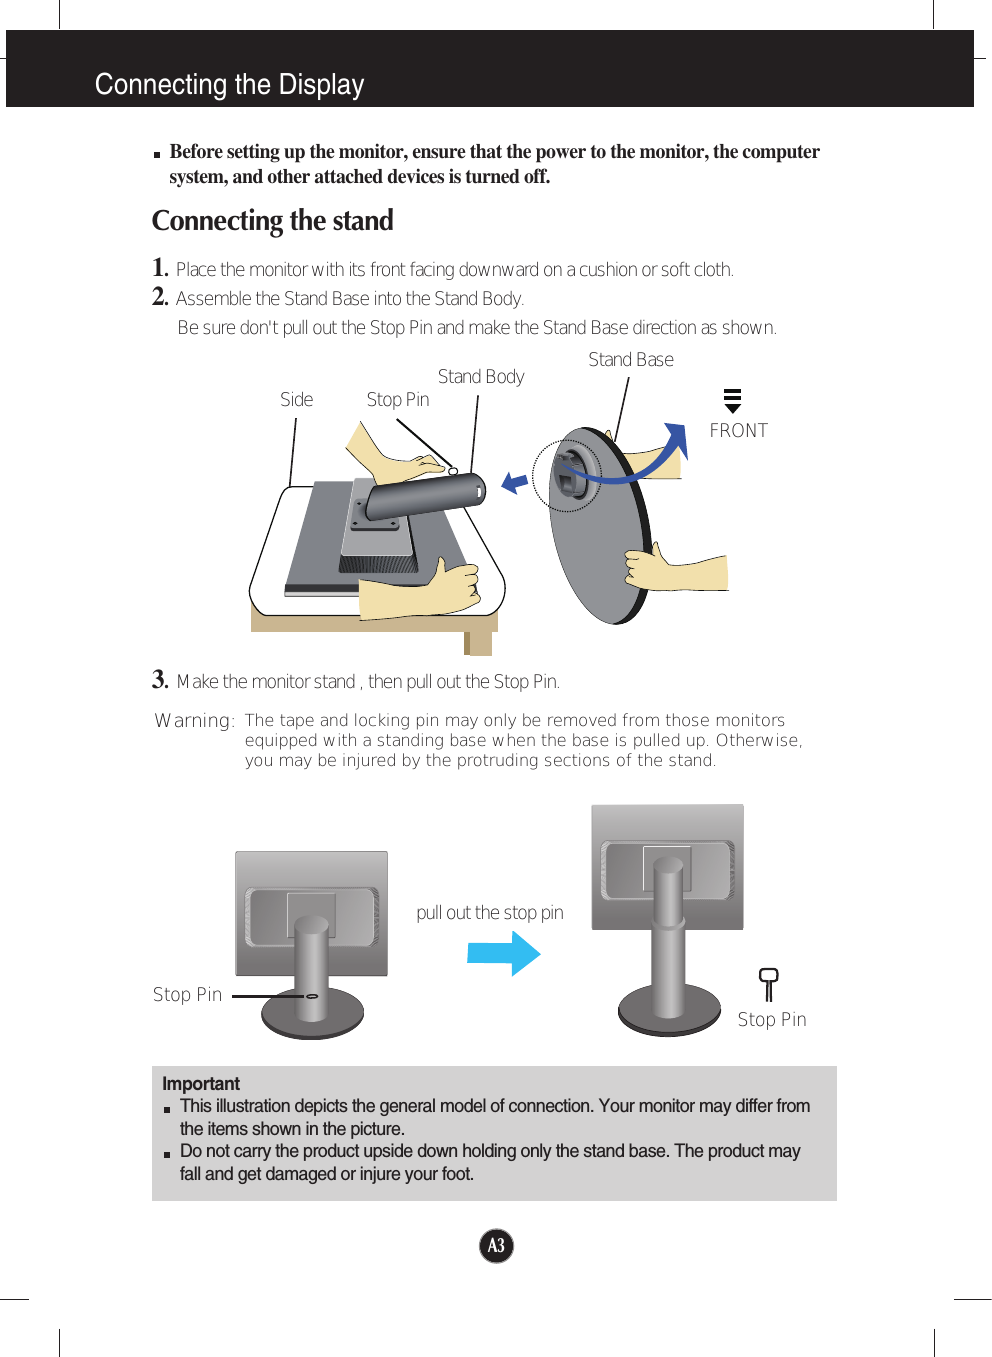 A3Connecting the DisplayImportantThis illustration depicts the general model of connection. Your monitor may differ fromthe items shown in the picture.Do not carry the product upside down holding only the stand base. The product mayfall and get damaged or injure your foot.Before setting up the monitor, ensure that the power to the monitor, the computersystem, and other attached devices is turned off.Connecting the stand 1.  Place the monitor with its front facing downward on a cushion or soft cloth.2.Assemble the Stand Base into the Stand Body.Be sure don&apos;t pull out the Stop Pin and make the Stand Base direction as shown. 3.Make the monitor stand , then pull out the Stop Pin.Stand BaseFRONTStand BodyStop PinSideStop Pin Stop Pinpull out the stop pinThe tape and locking pin may only be removed from those monitorsequipped with a standing base when the base is pulled up. Otherwise,you may be injured by the protruding sections of the stand.Warning: